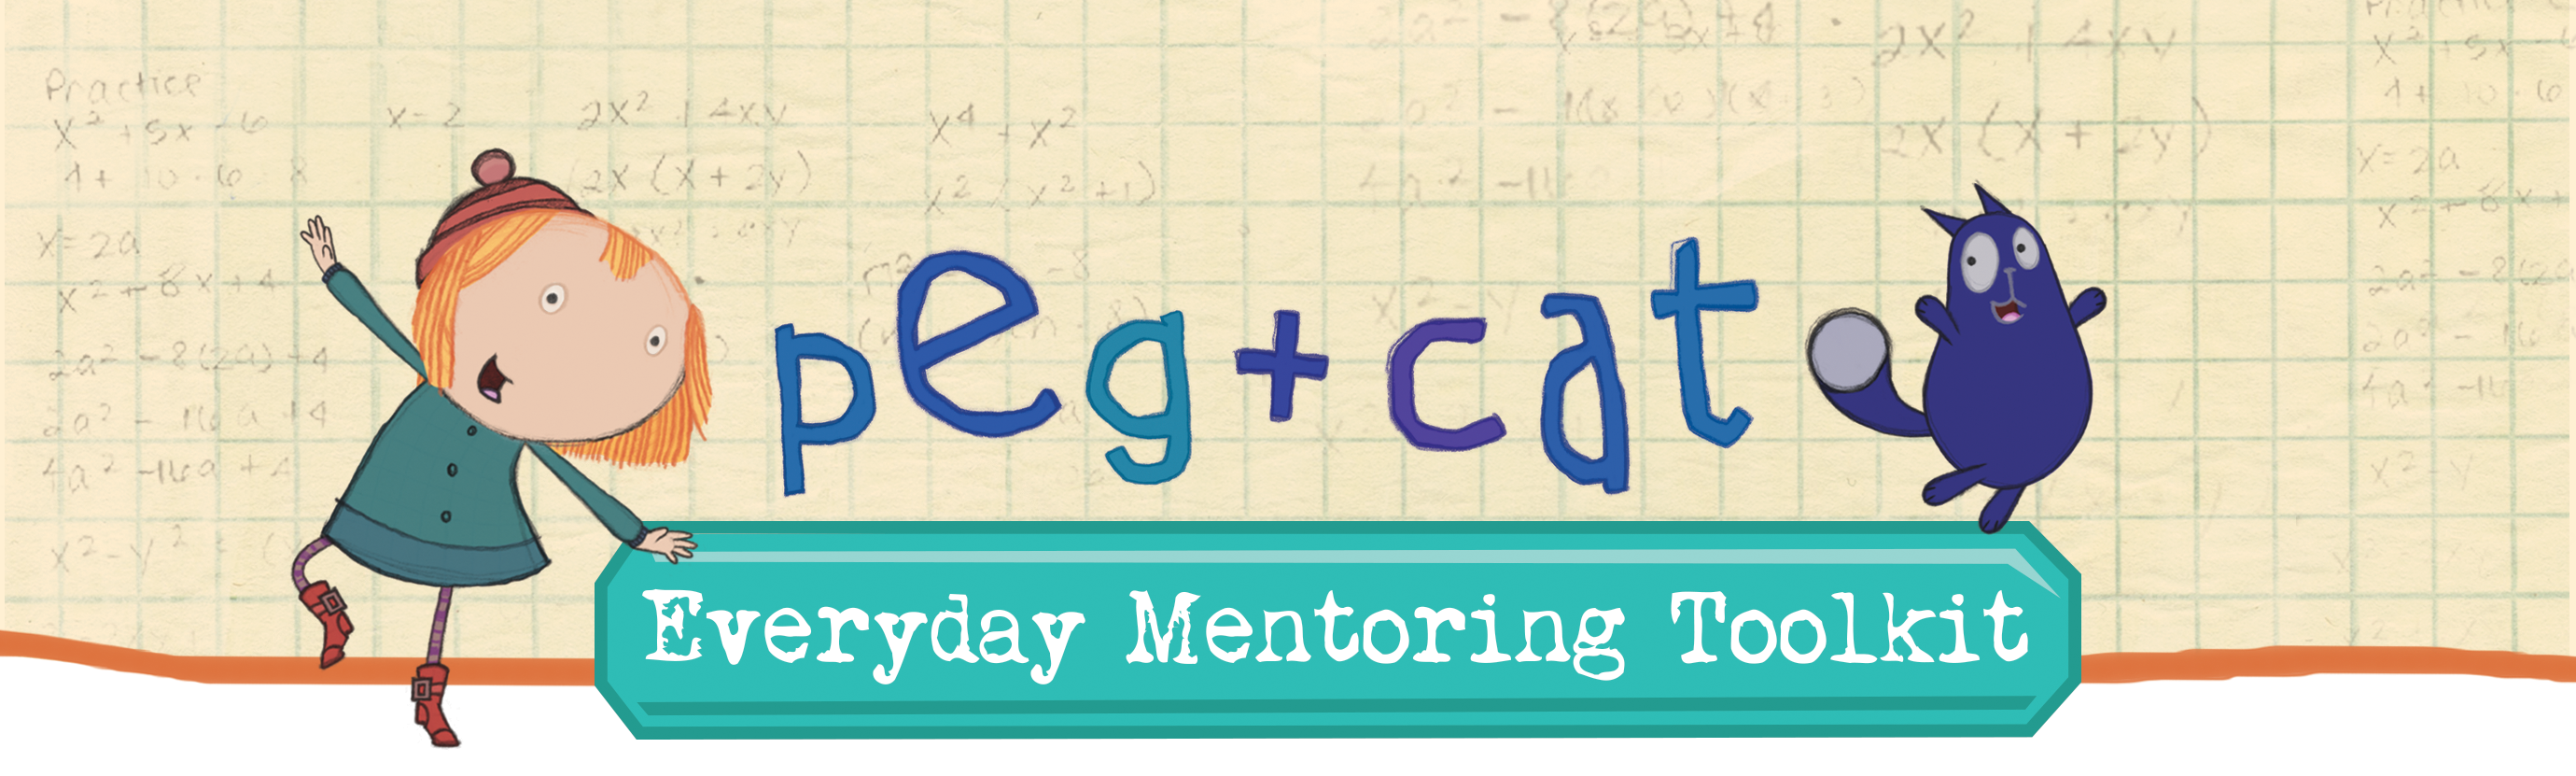 TMP Teams Up with The Fred Rogers Co. on Peg+Cat Everyday Mentoring Toolkit